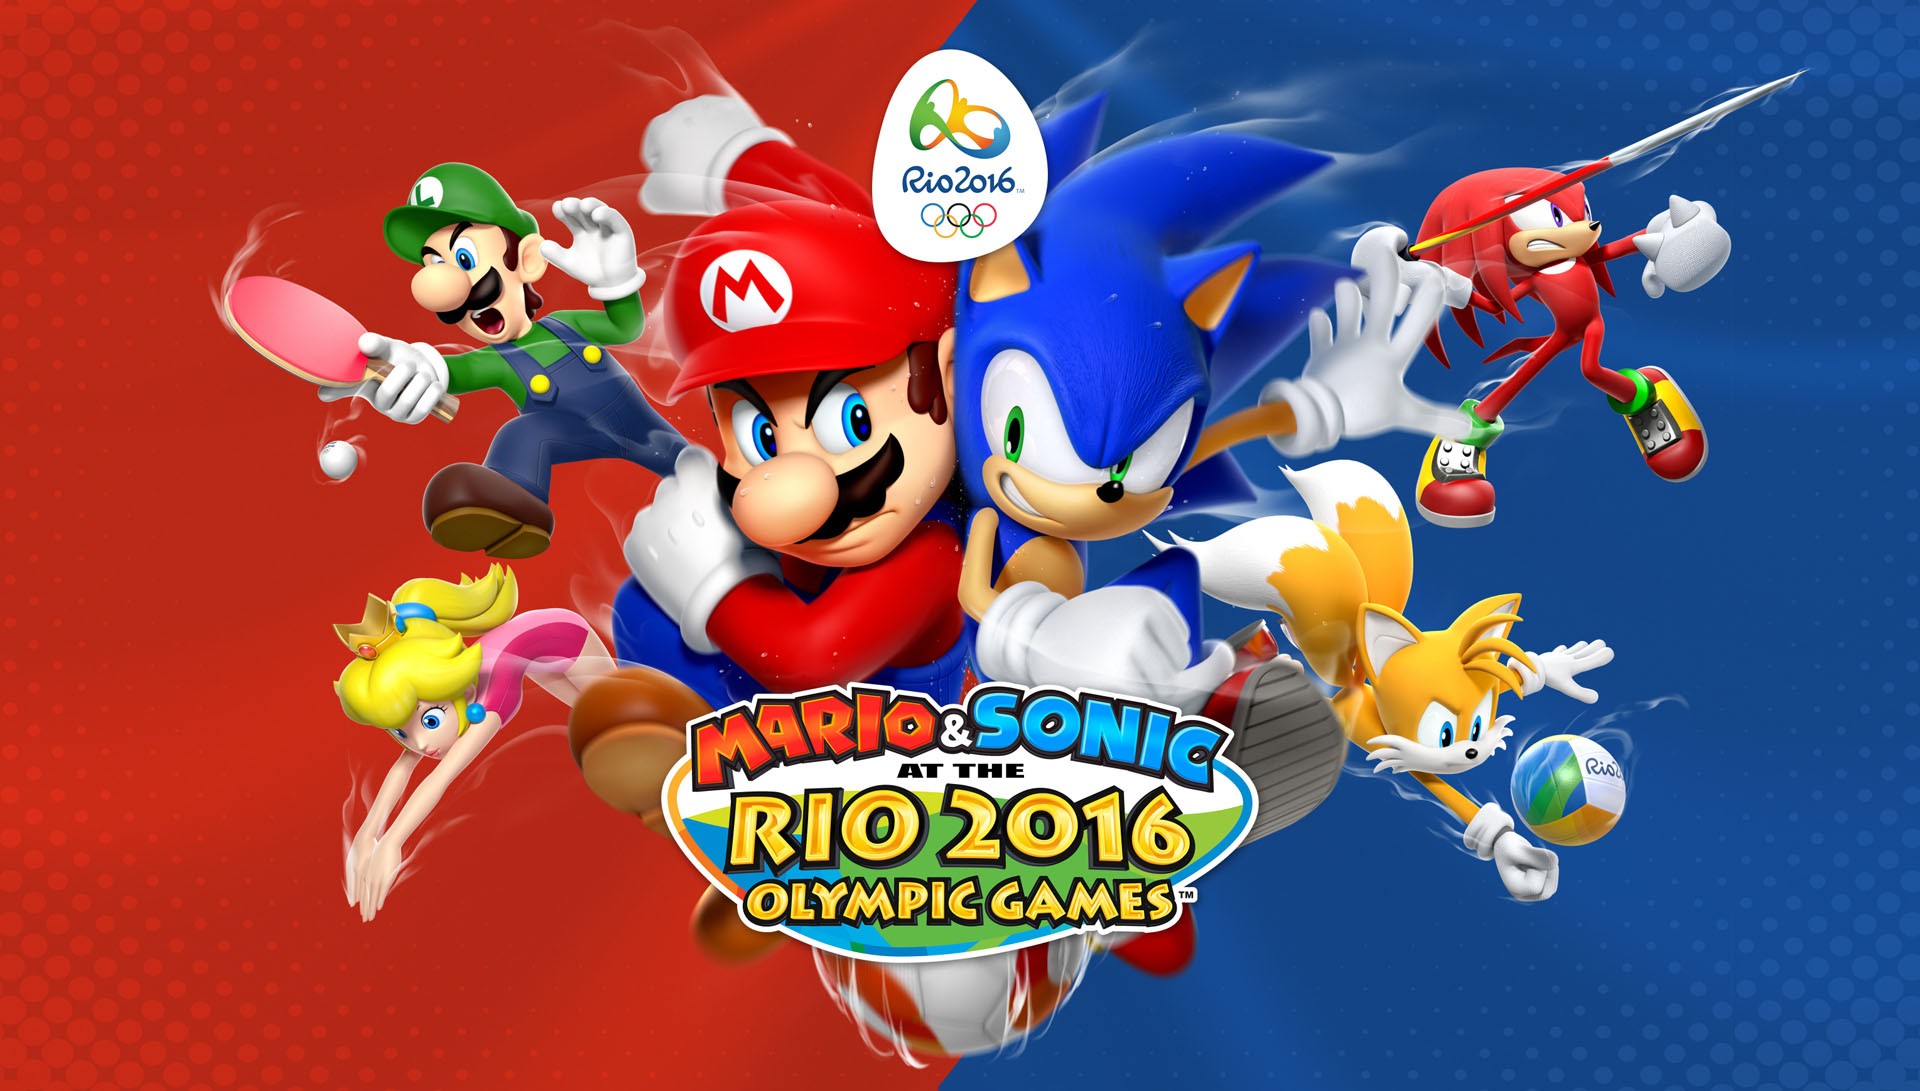 video Games, Artwork, Mario & Sonic At The Rio 2016 Olympic Games